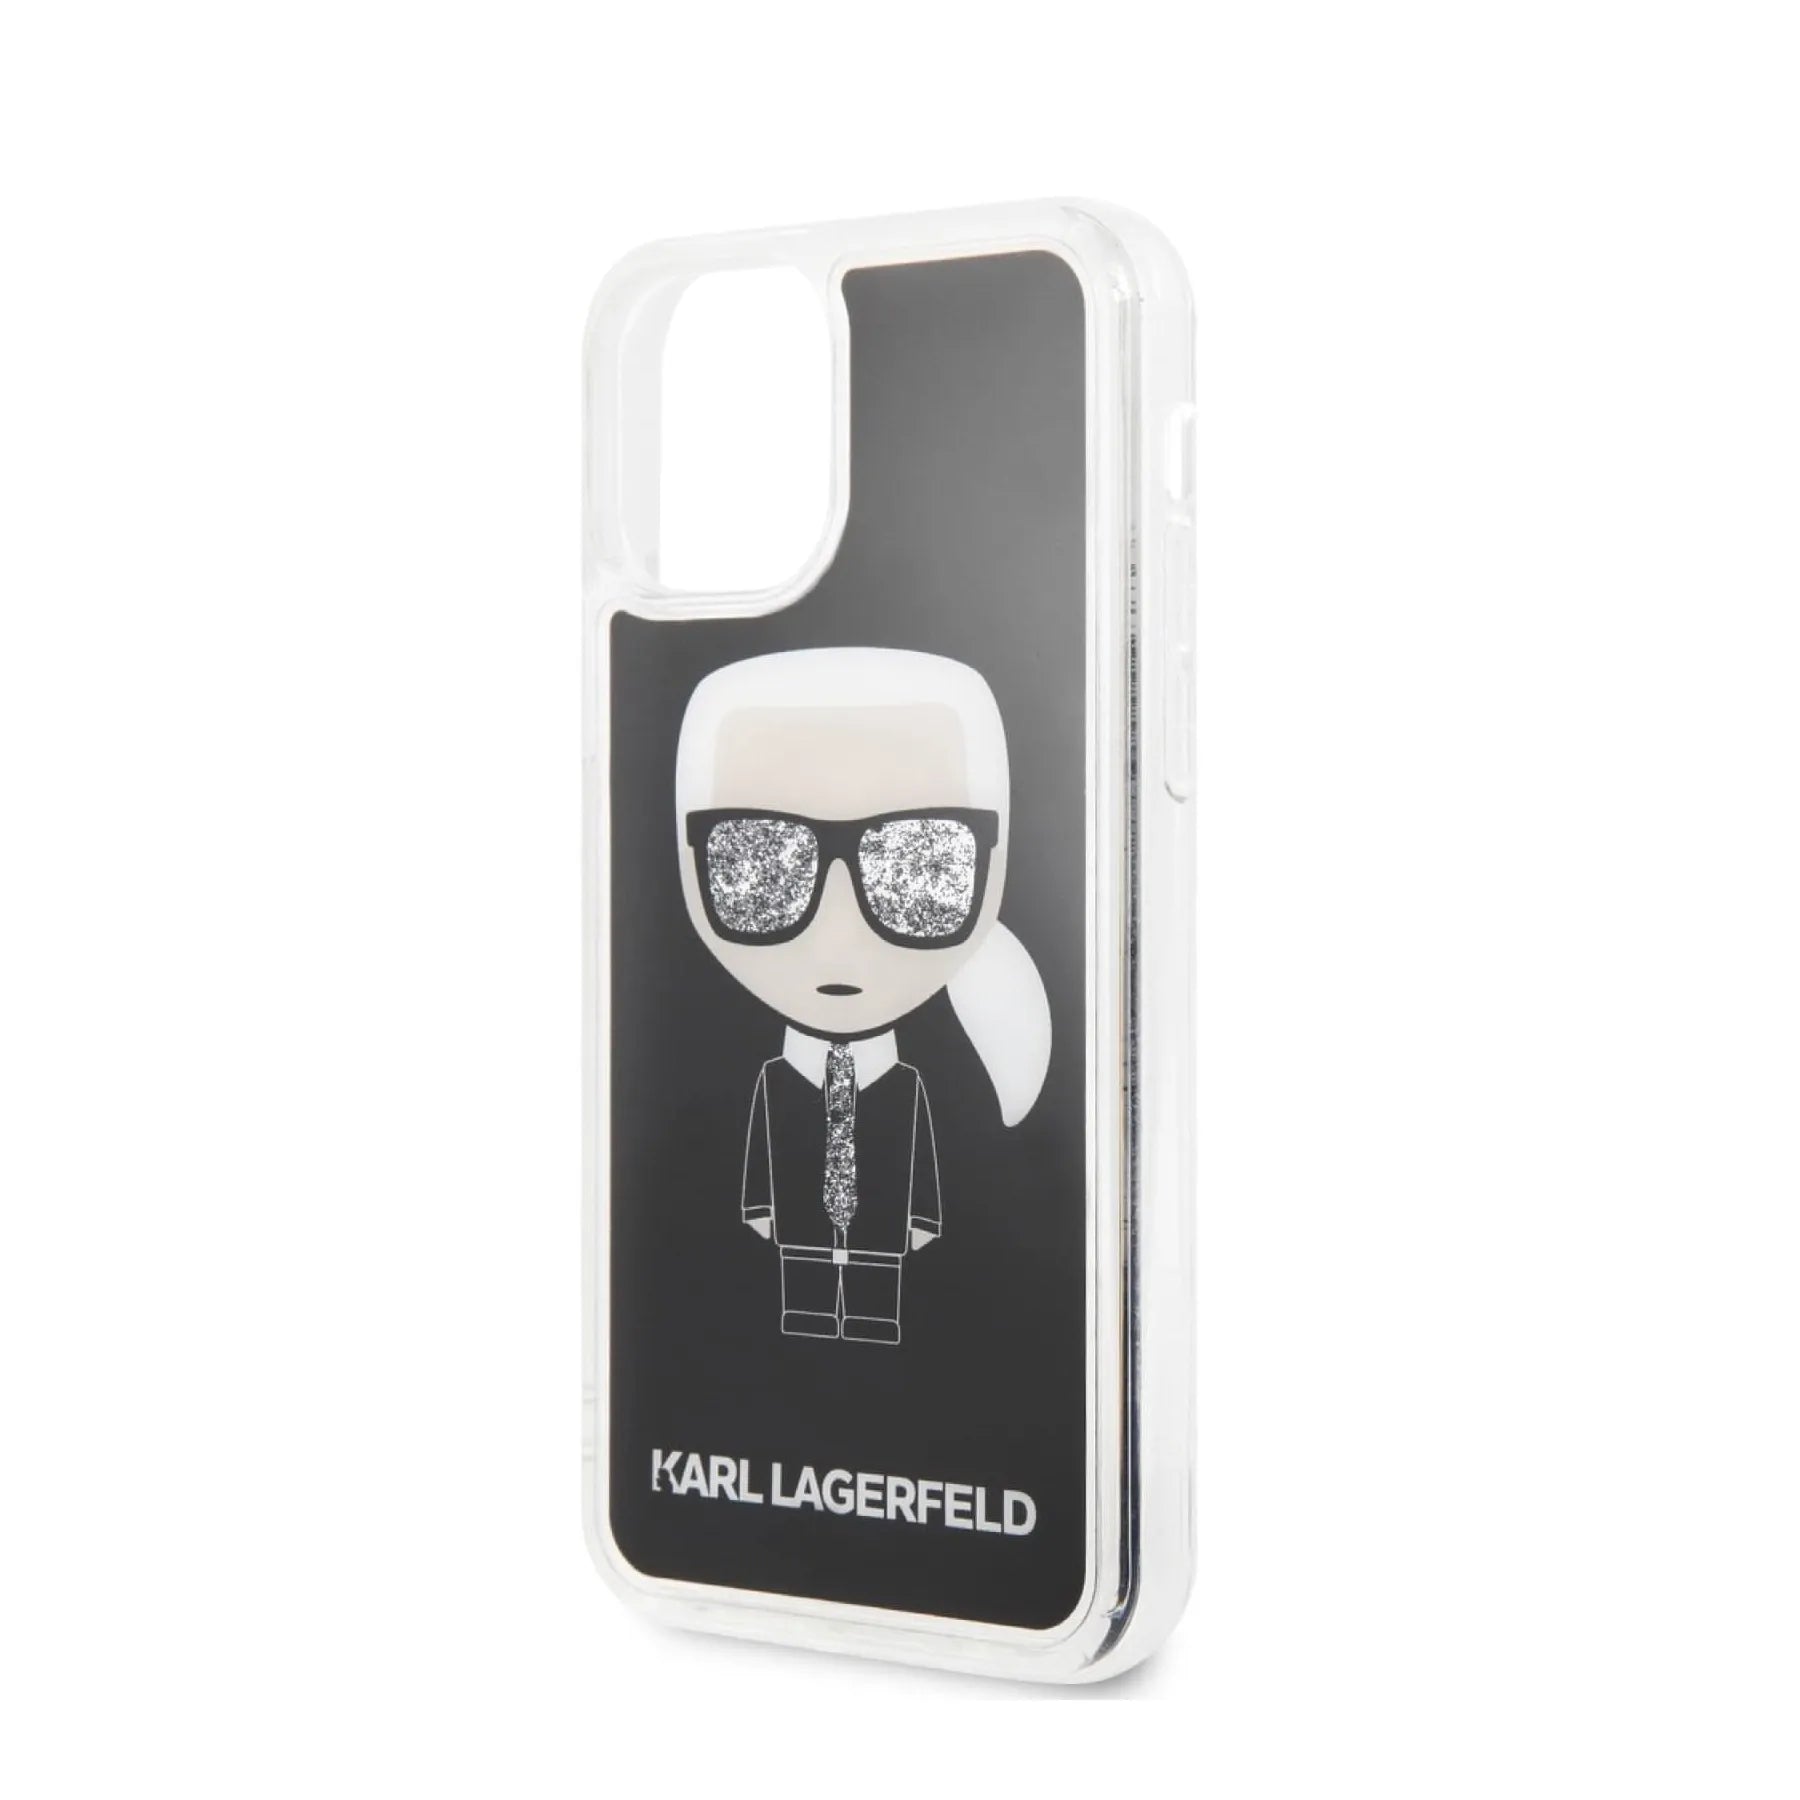 Coque Karl Lagerfeld pour iPhone 11 - My Store